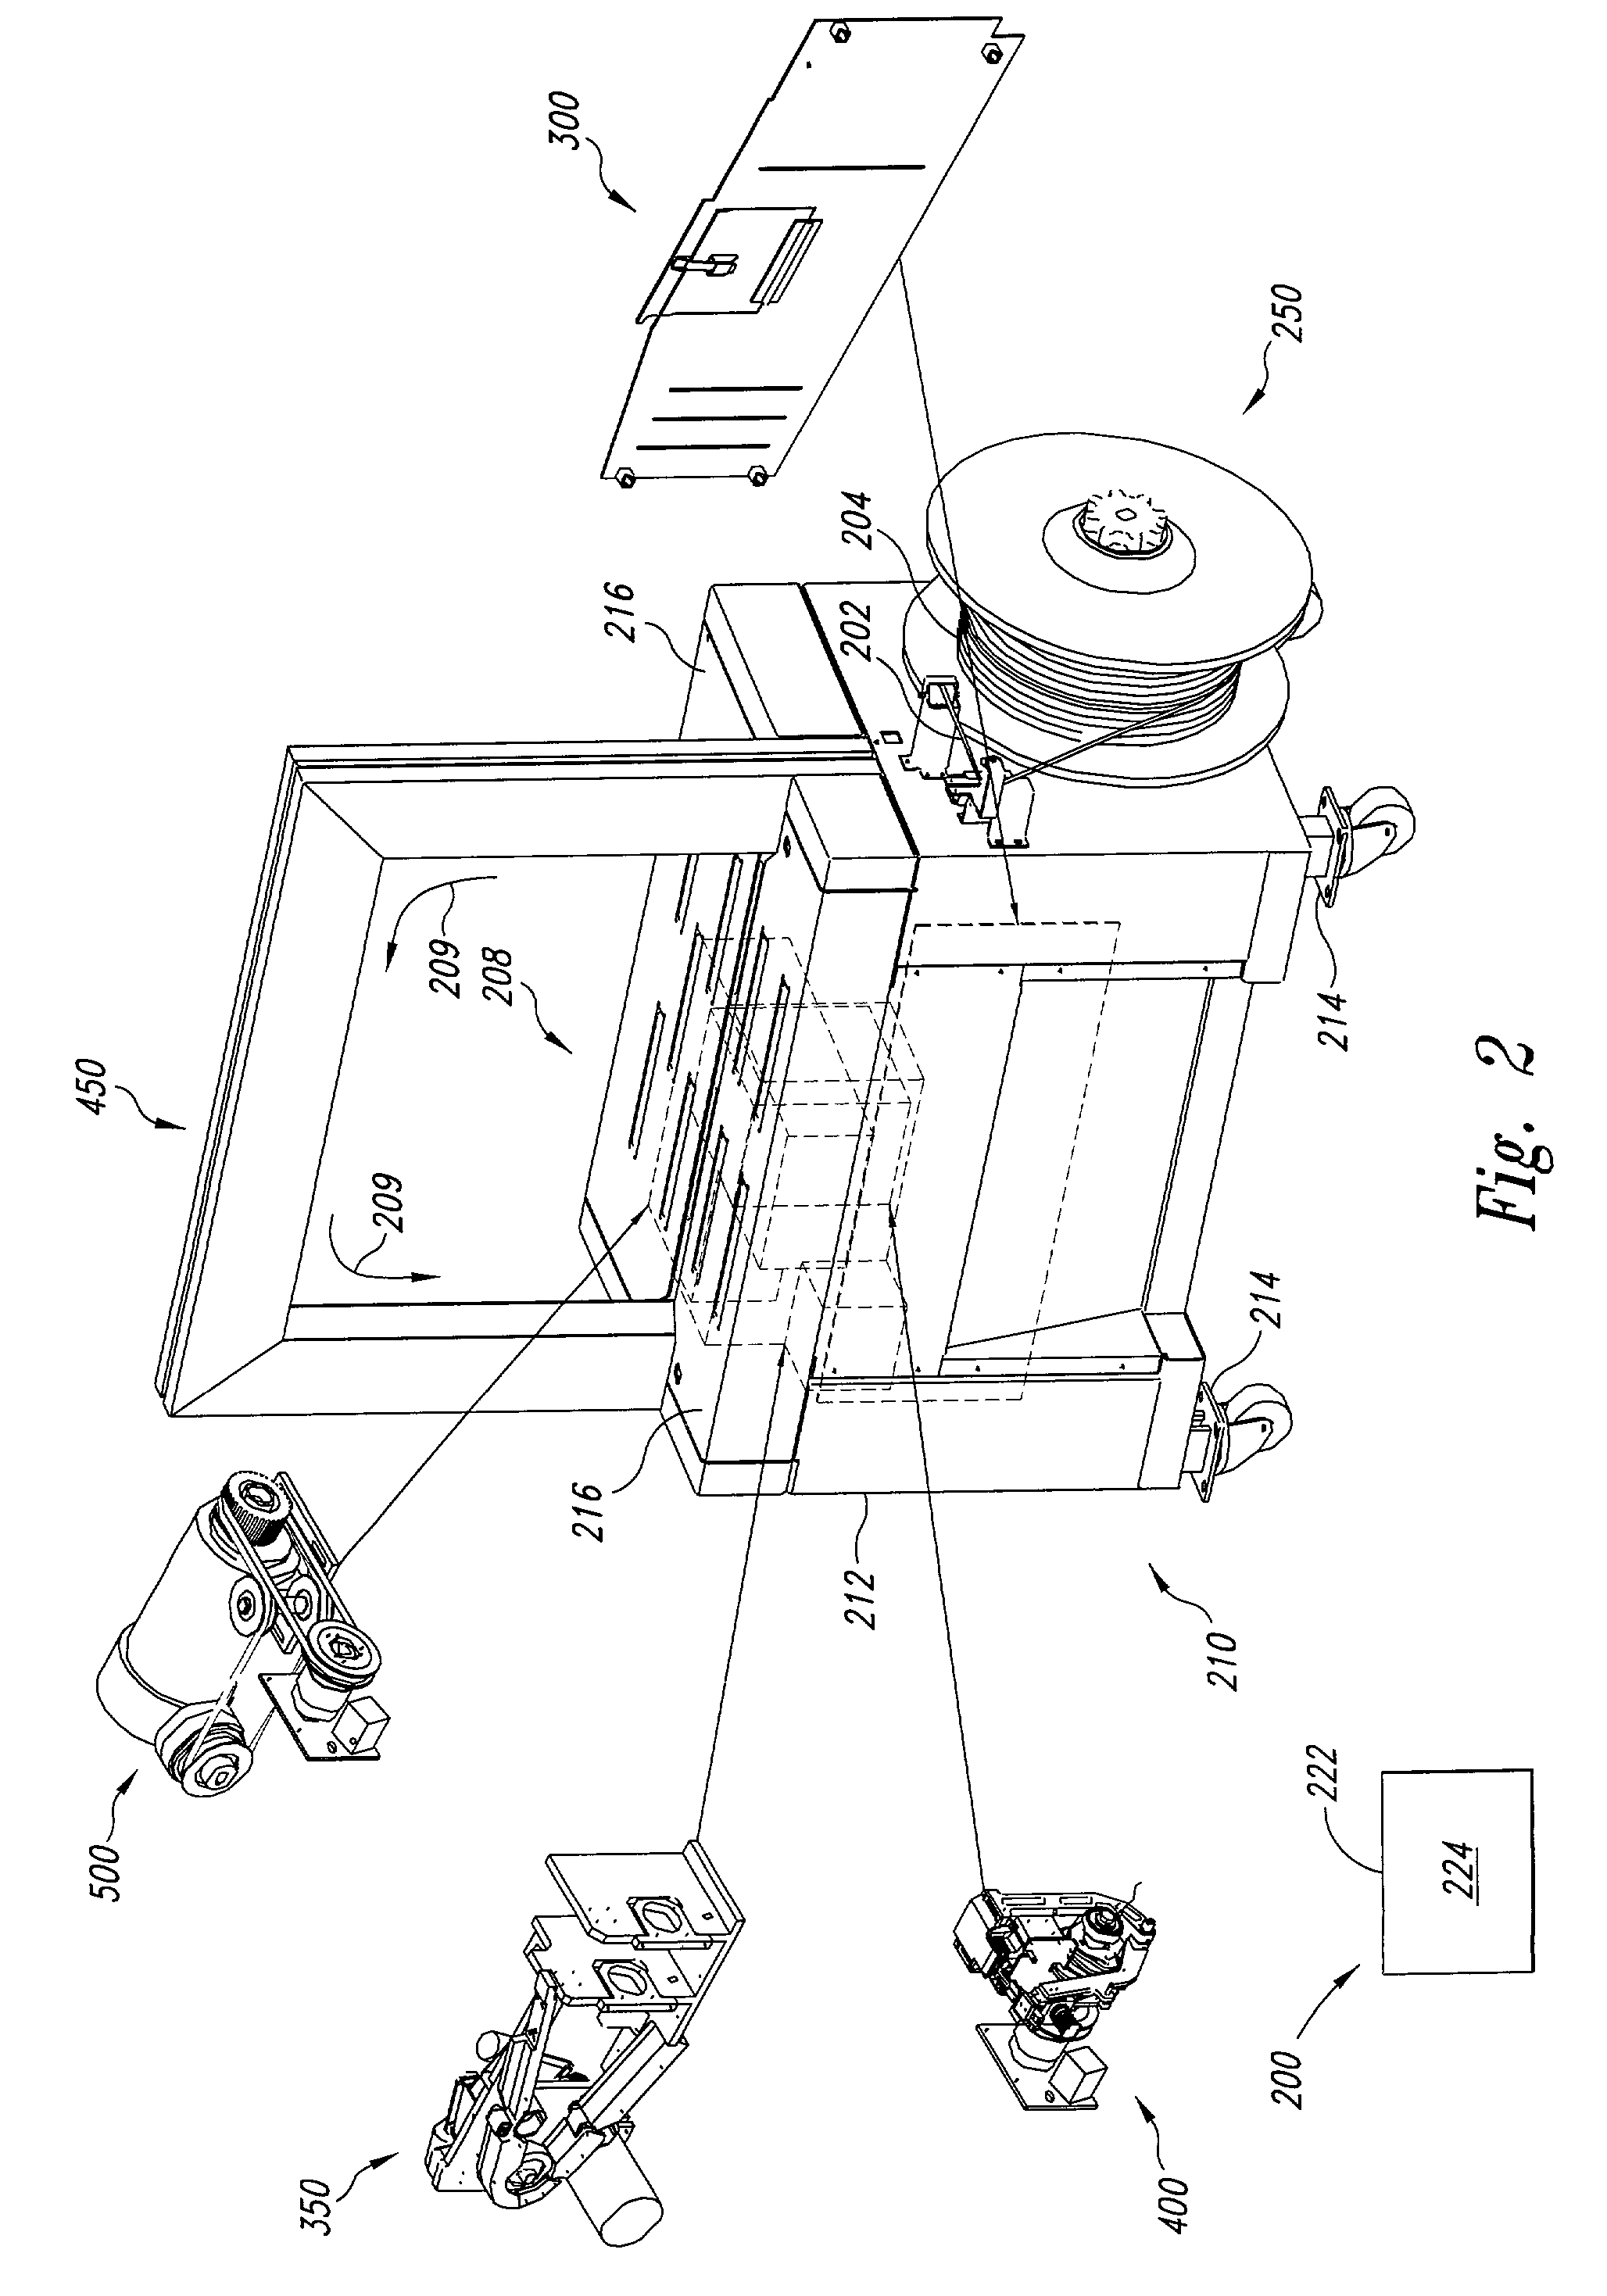 Control mechanism for a feed and tension unit in a strapping apparatus